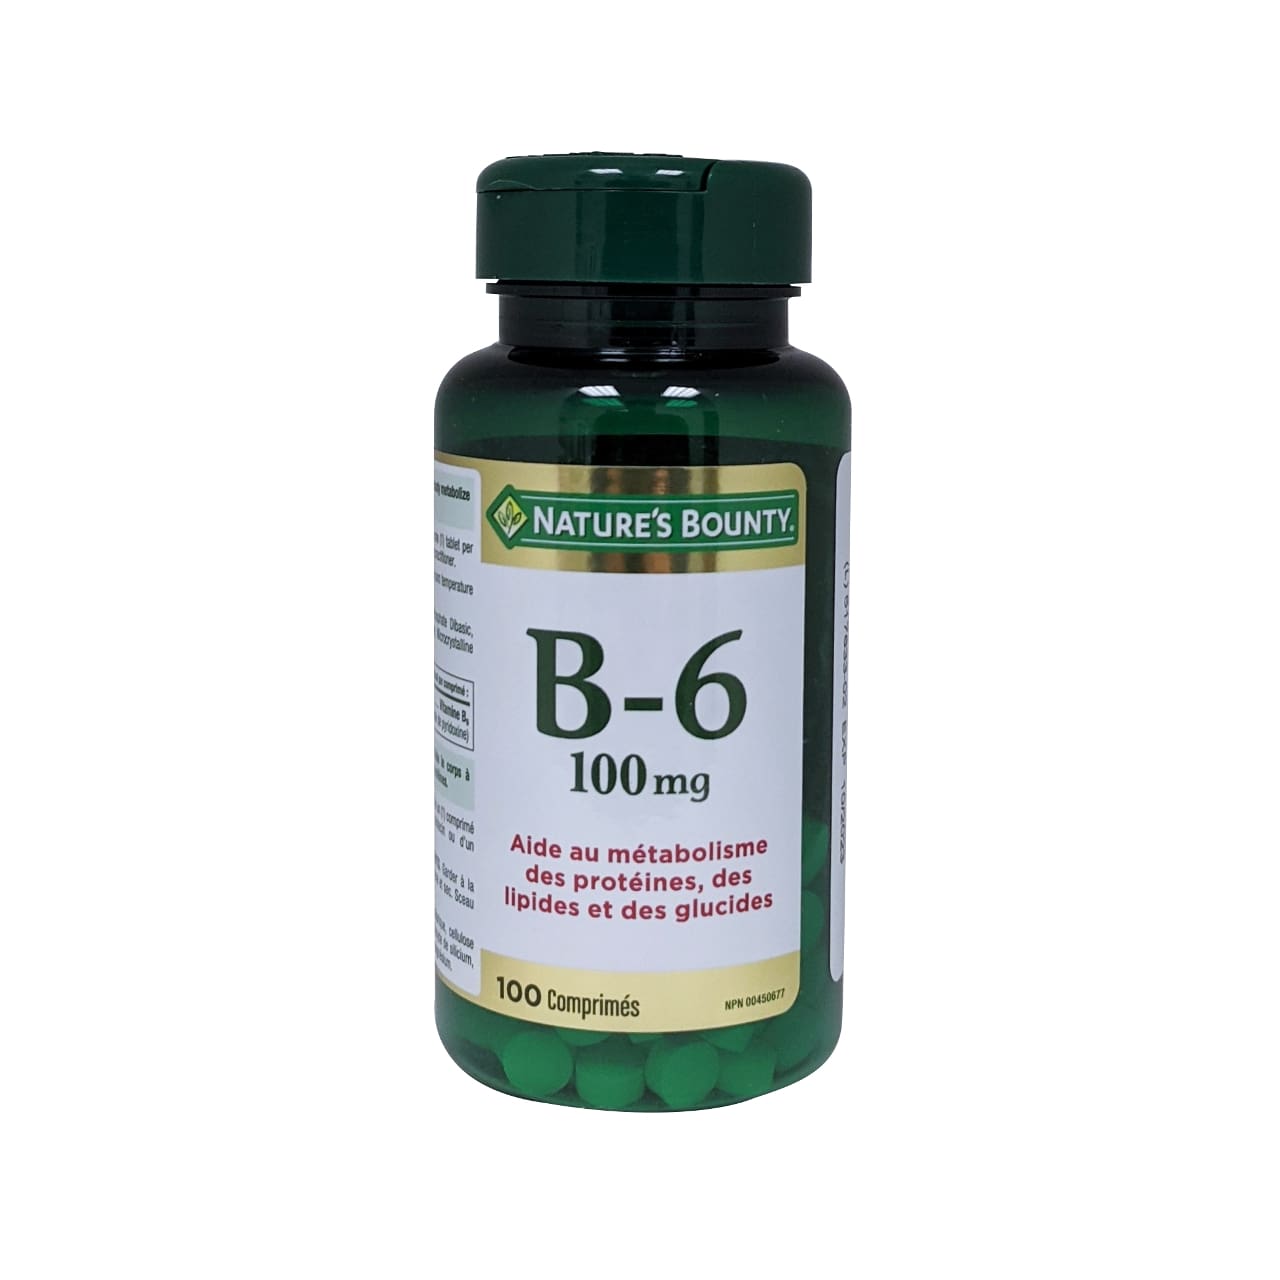 Product label for Nature's Bounty Vitamin B6 100mg in French